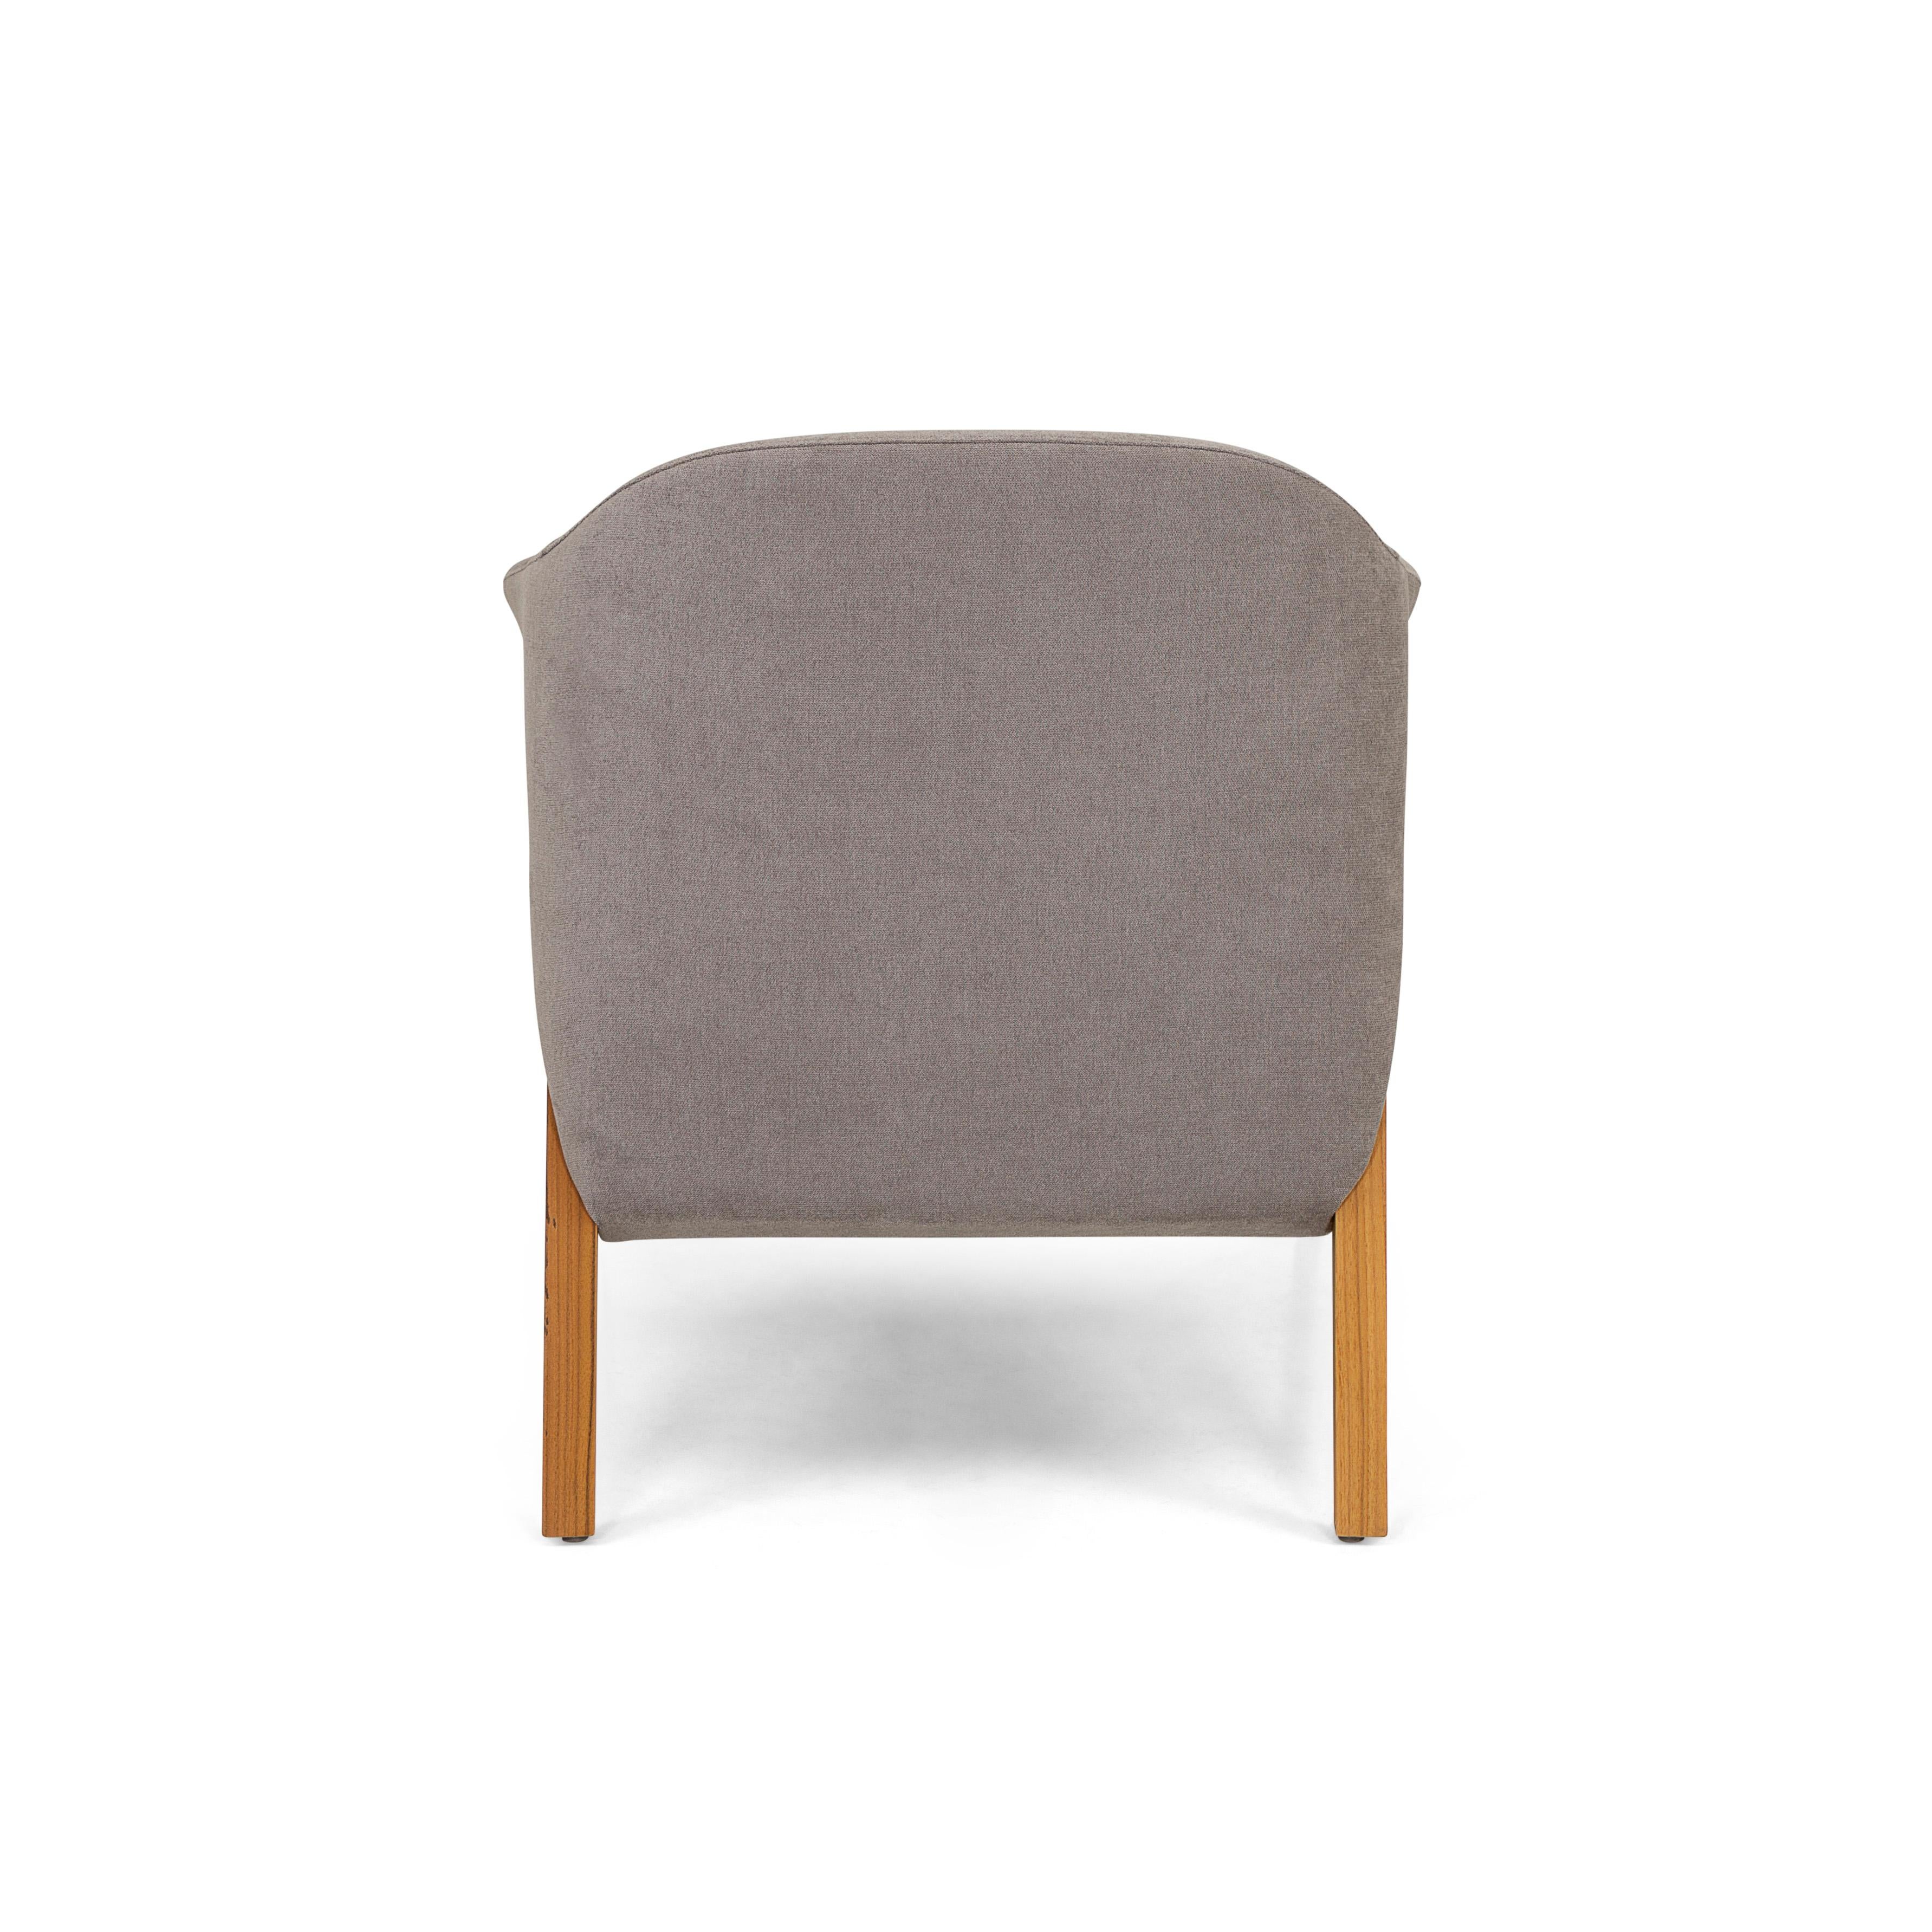 Contemporary Osa Upholstered Curve Back Armchair in Teak Finish and Gray Fabric